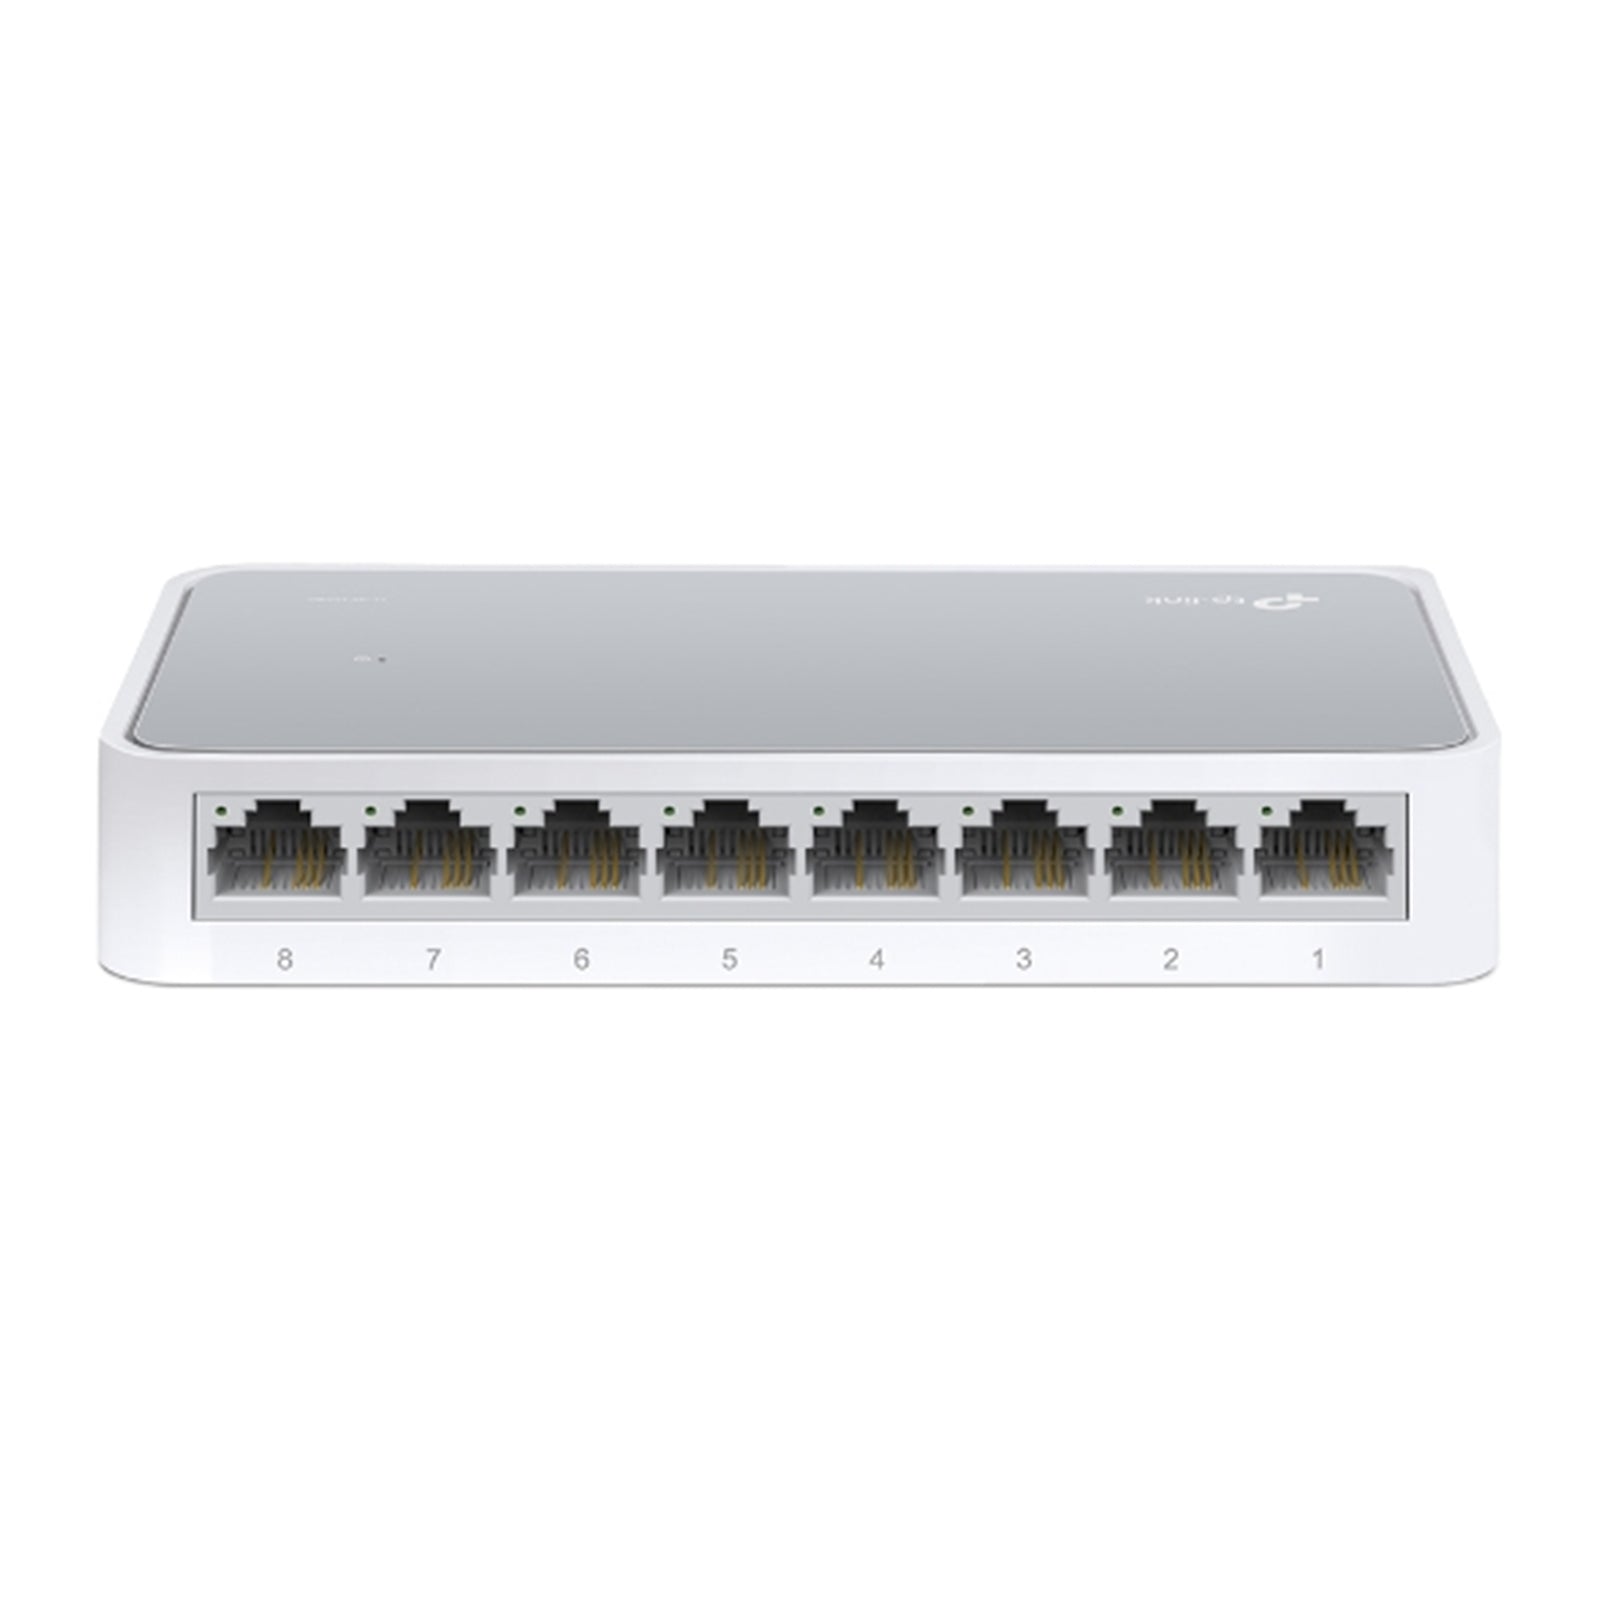 TP-Link TL-SF1008D Fast Ethernet Switch 8-Port 10/100Mbps High-Speed Network Hub